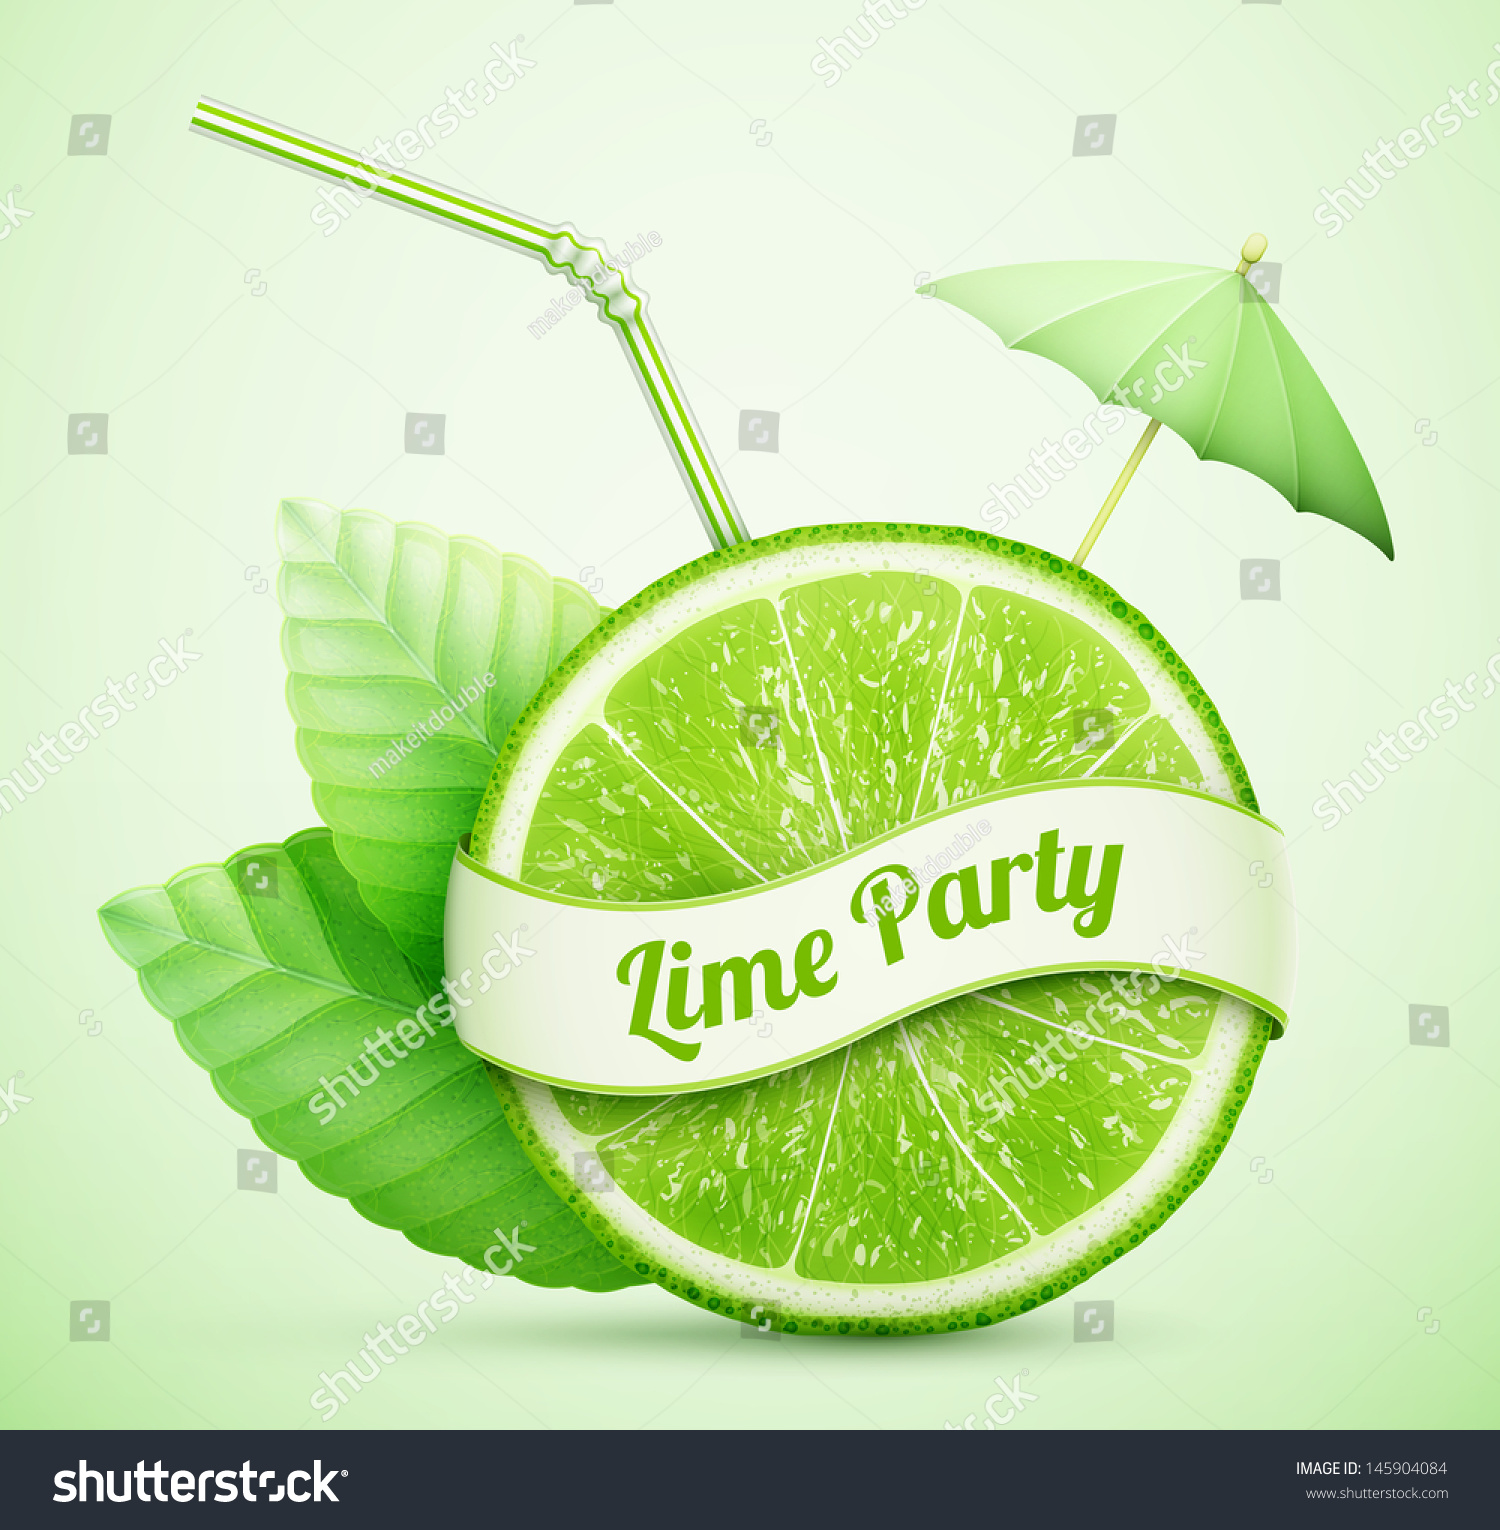 SVG of fresh lime with ribbon and cocktail stick eps10 vector illustration svg